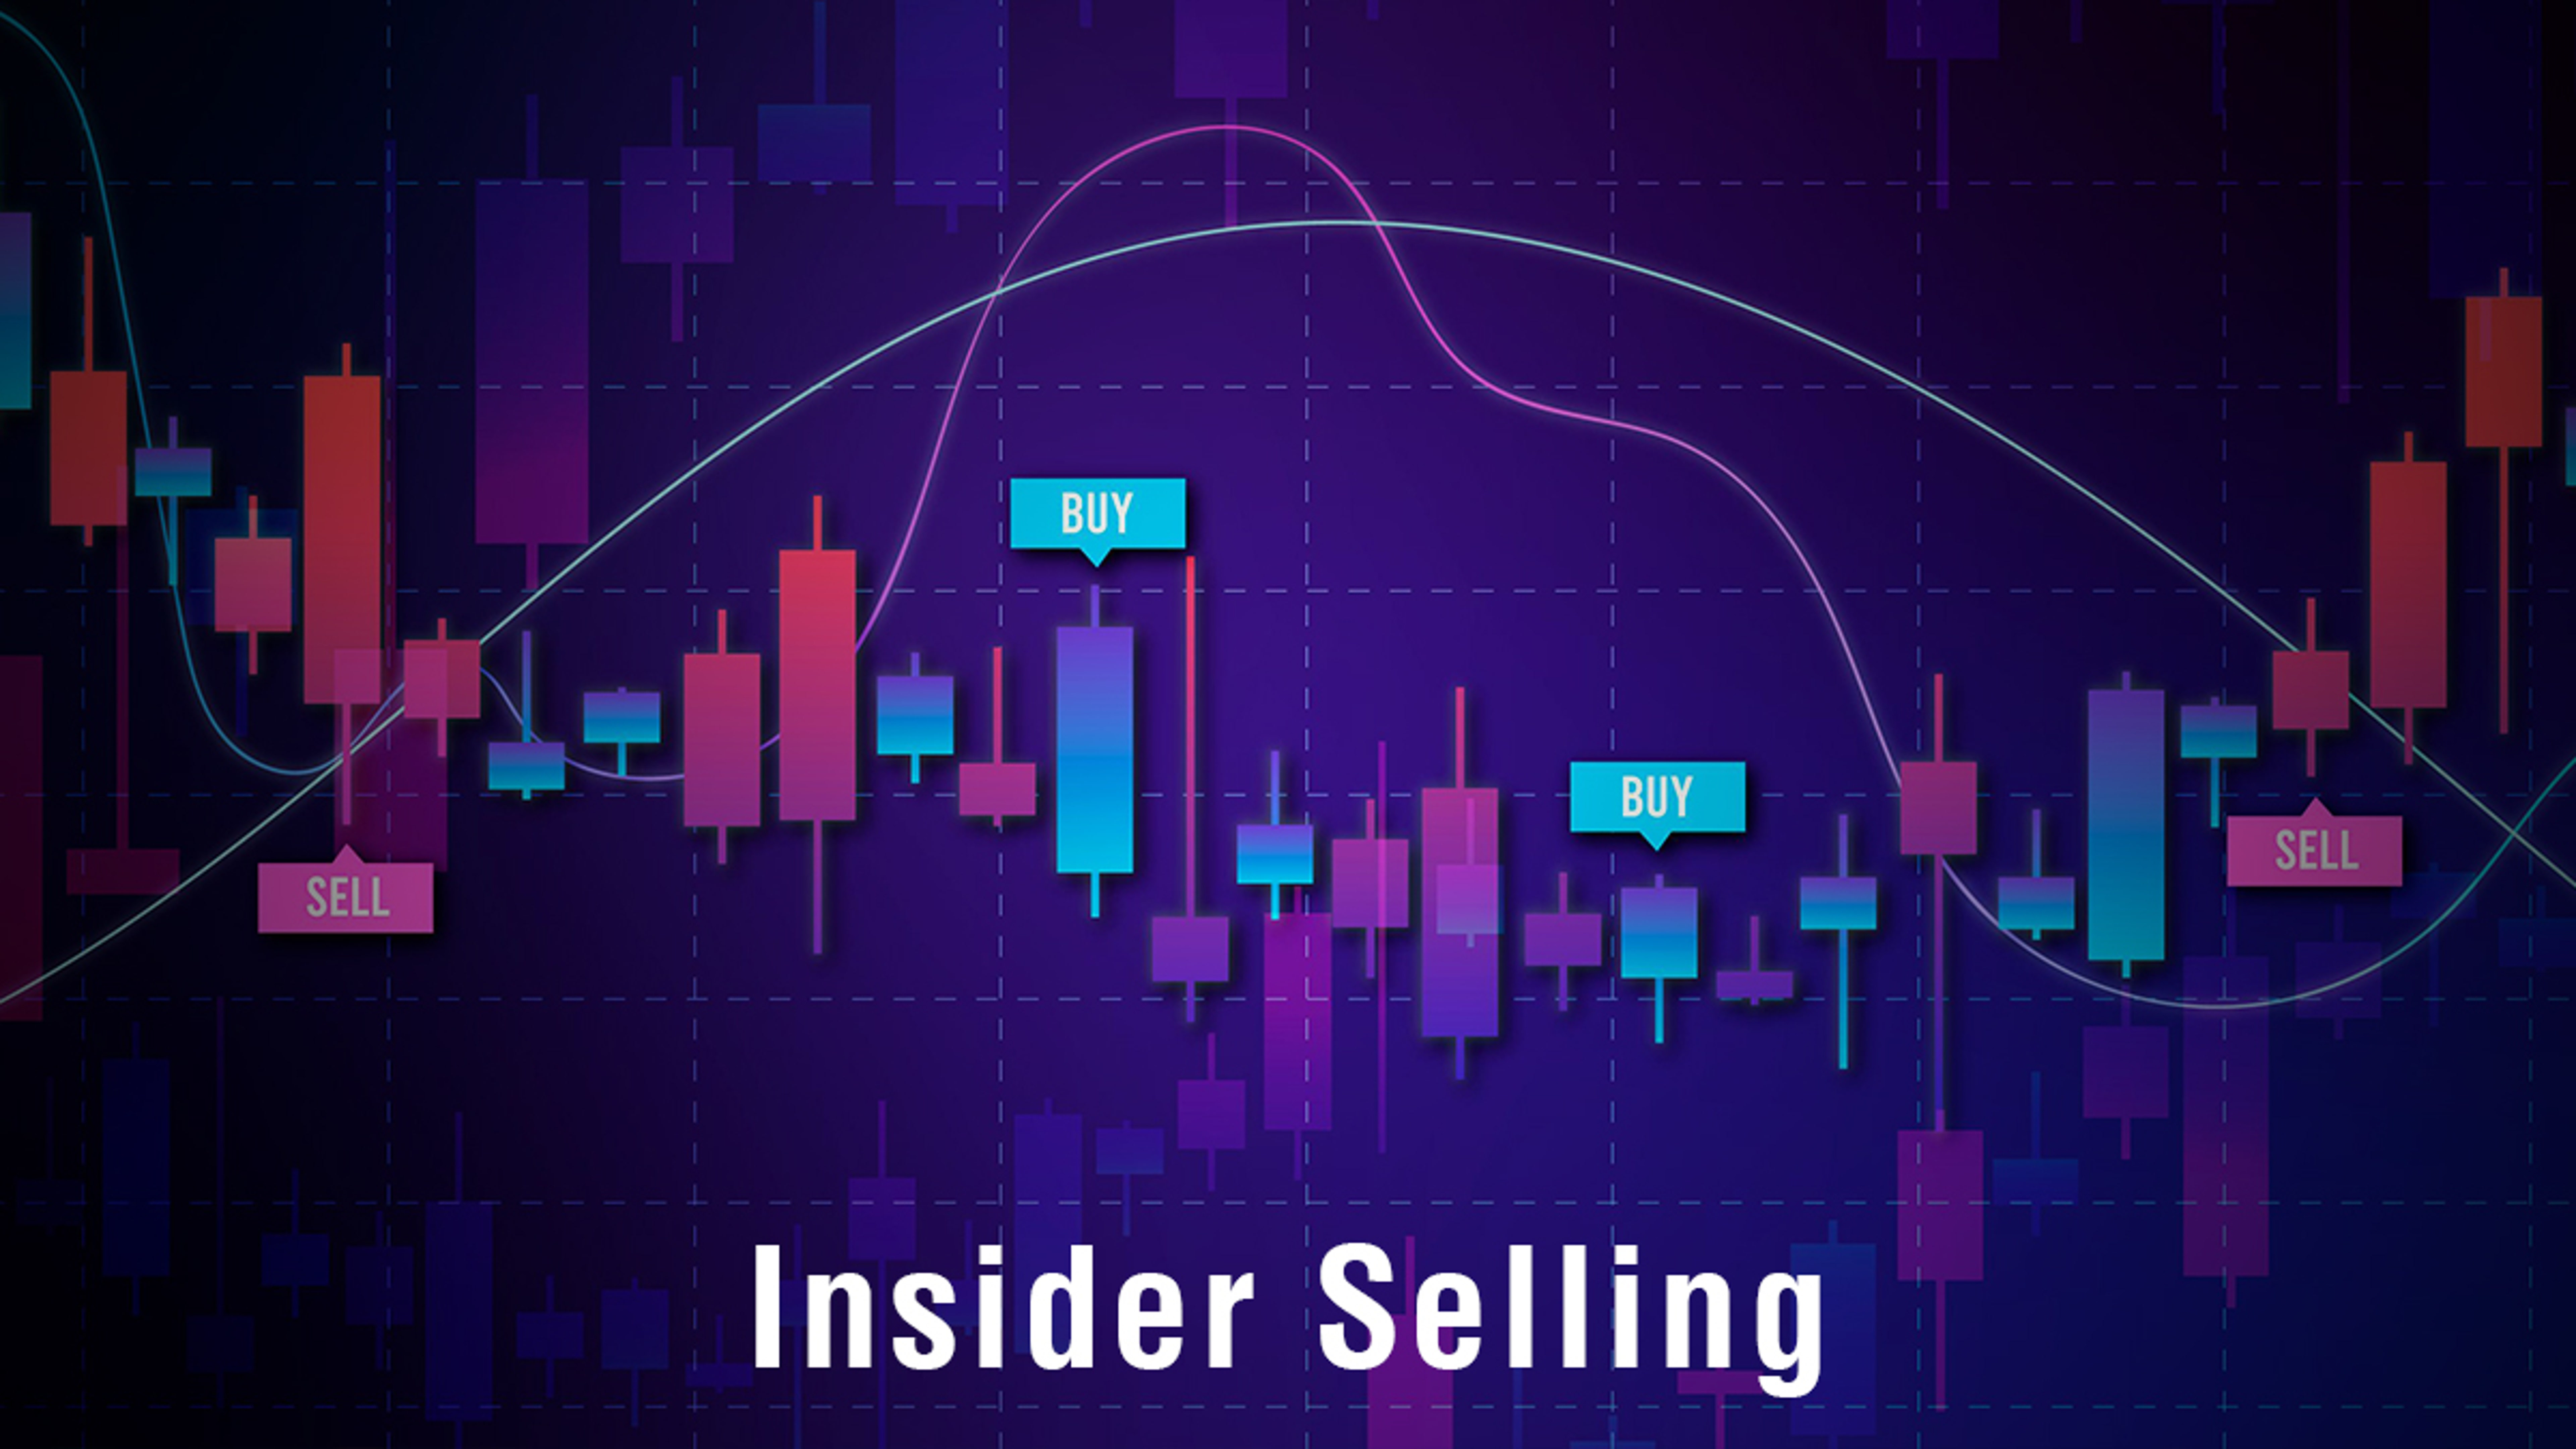 3 Stocks Insiders Are Selling